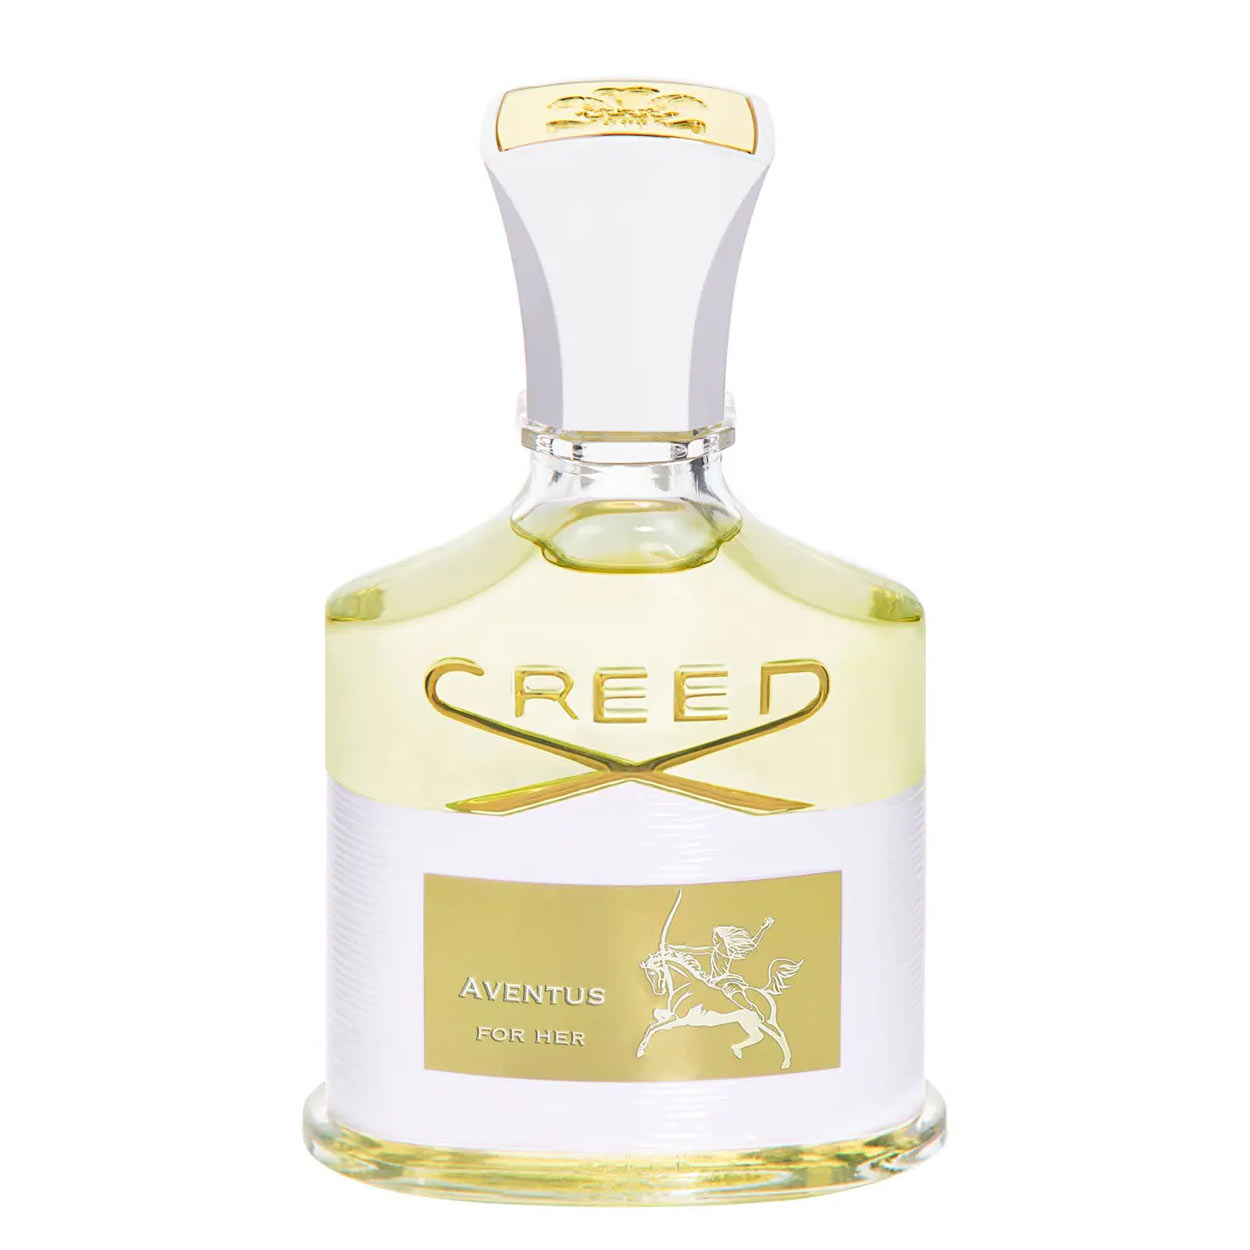 Creed-Aventus-For-Her-Creed